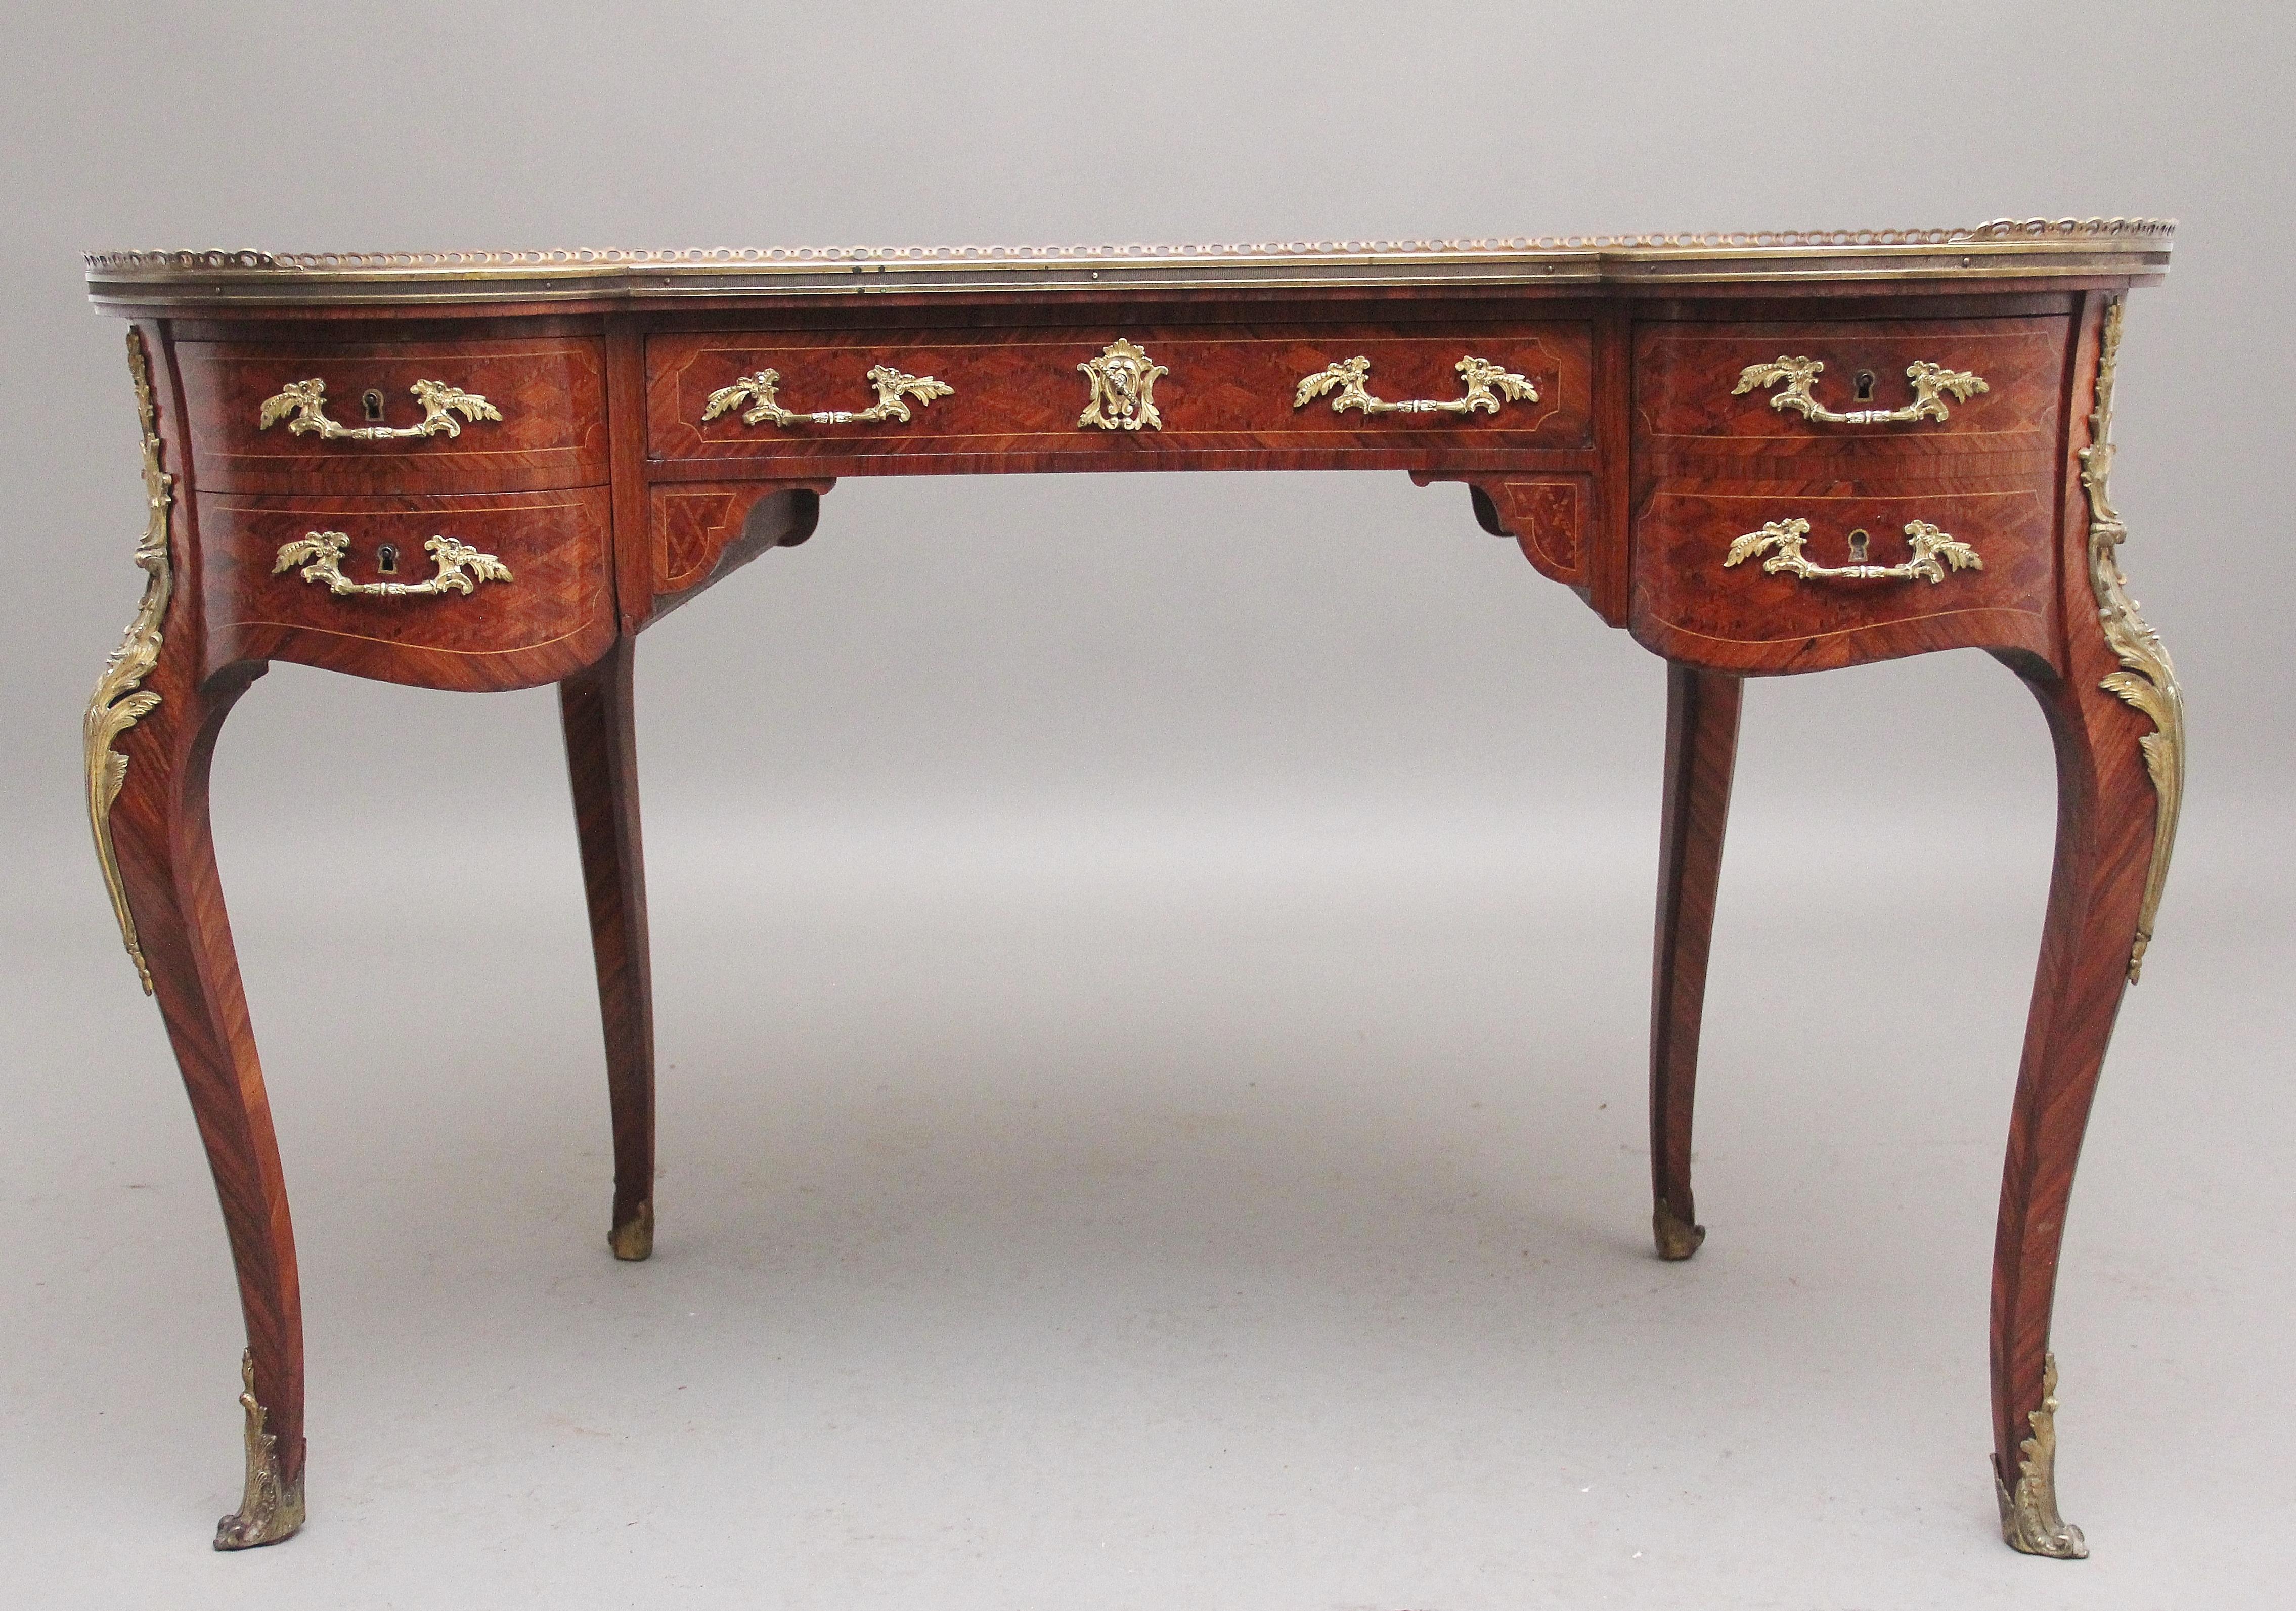 19th century freestanding French parquetry and Kingwood kidney desk, the kidney shaped top having a green leather writing surface decorated with blind and gilt tooling, a Kingwood border and a decorative brass gallery, with a brass moulding running